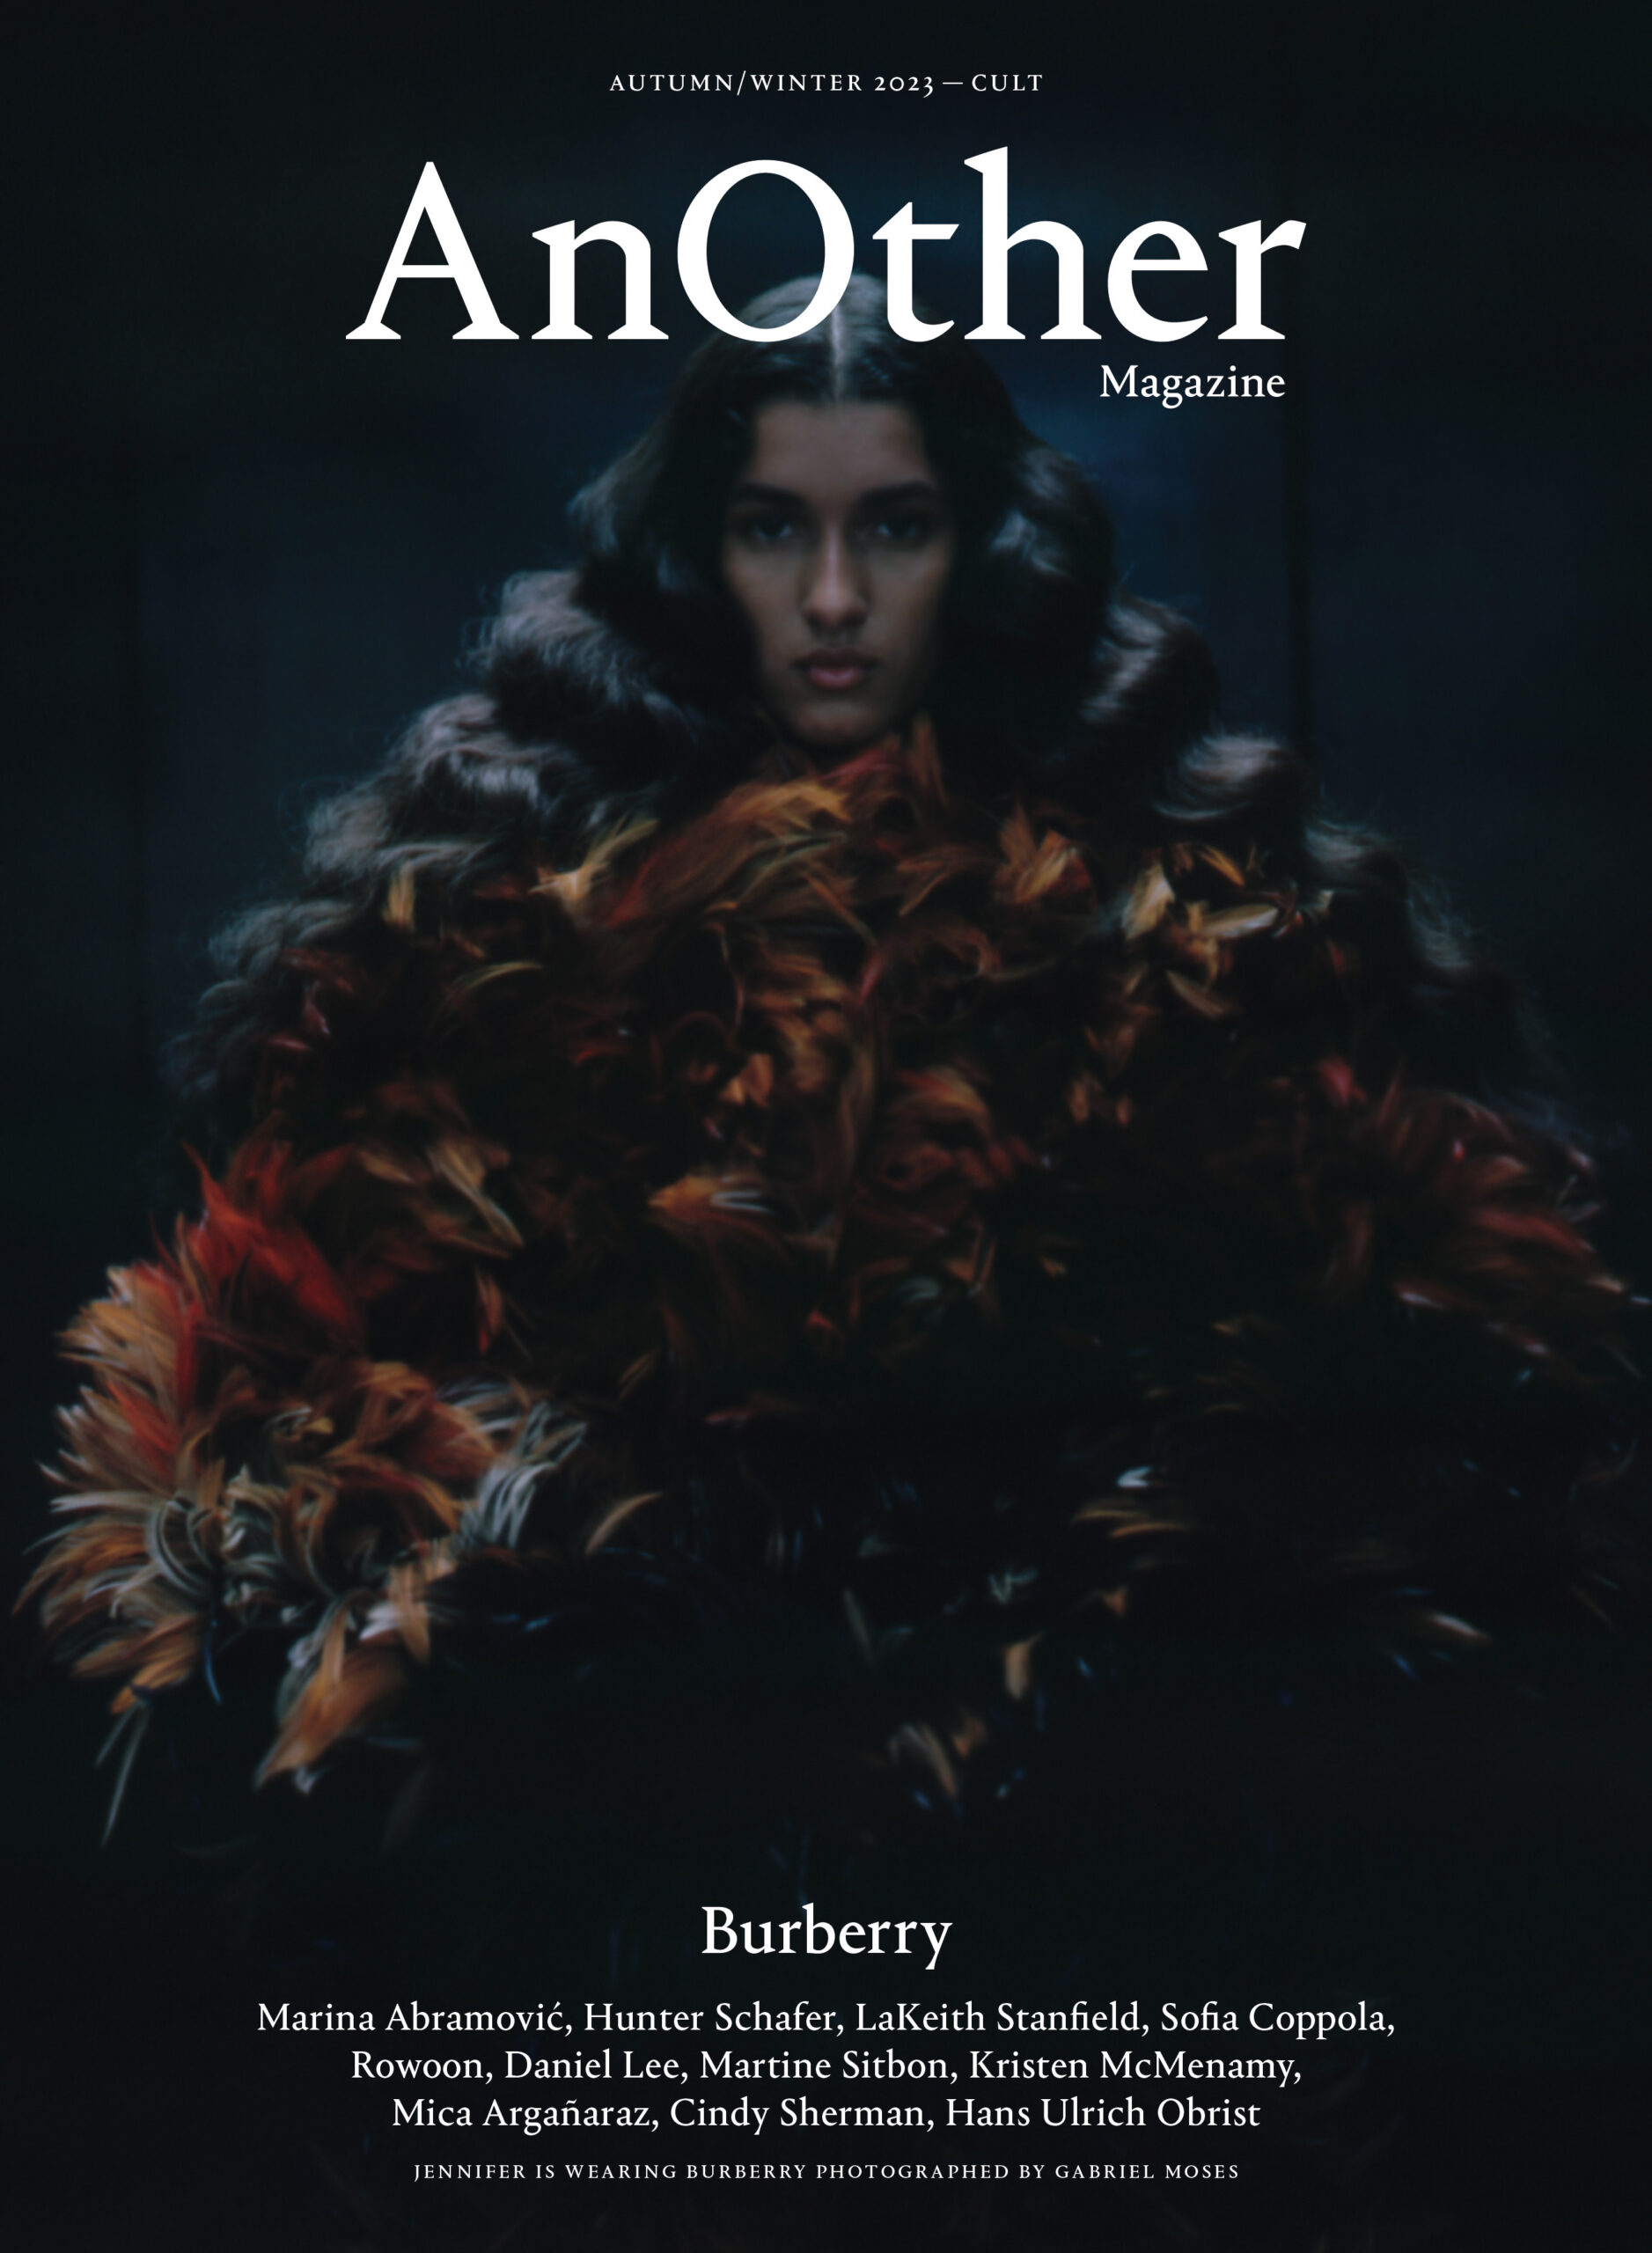 Tapestry-soho-frith-street-london-uk-production-agency-reprographics-publishing-another-magazine-autumn-winter-issue-out-now-worldwide-distribution-publication
